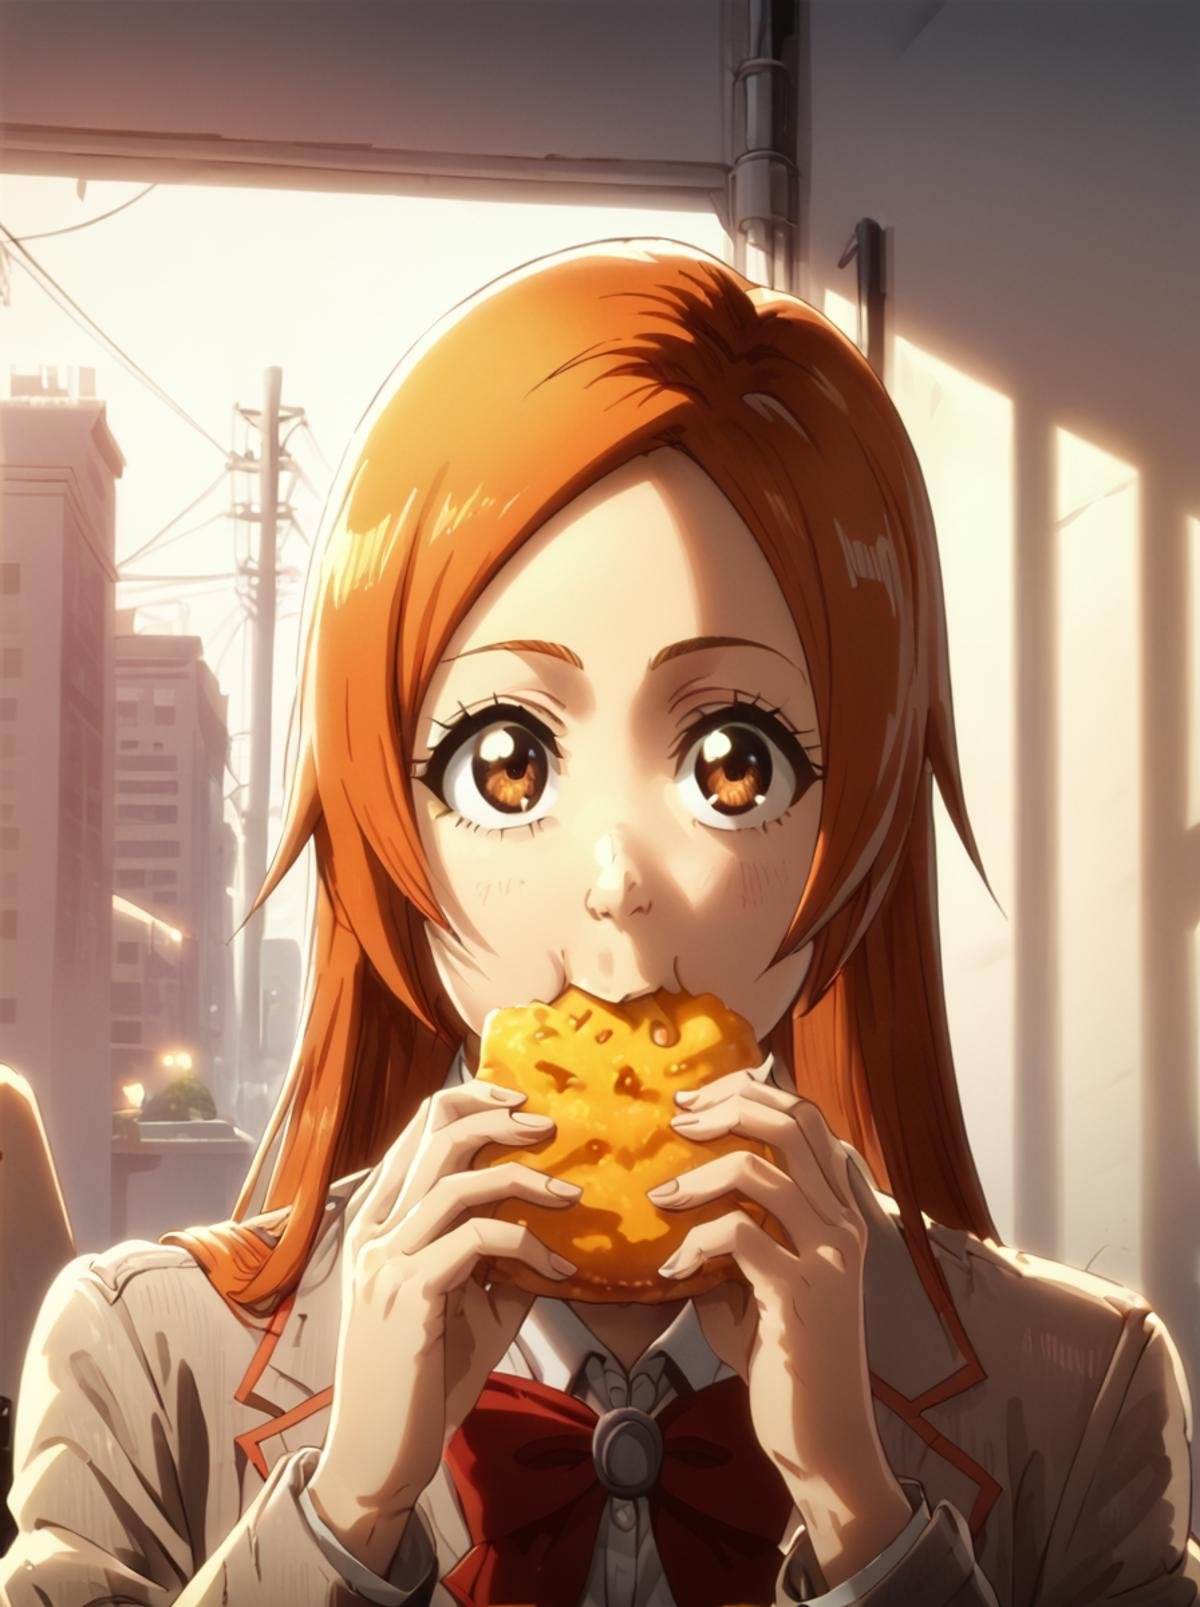 score_9, score_8_up, score_7_up, ,source_anime,BREAK,overalldetail,eyedetail,detailed face, BleachTYBW,orihime,score_9,, 1girl, eating, food, solo, school uniform, bow, orange hair, brown eyes, long hair, long and slim cheese, jacket, holding, bowtie, looking at viewer,sunset ligths,natural lights,shadows <lora:bleach_tybw_pony:0.8> <lora:SinCityStylePony:0.8>,sincitystyle,